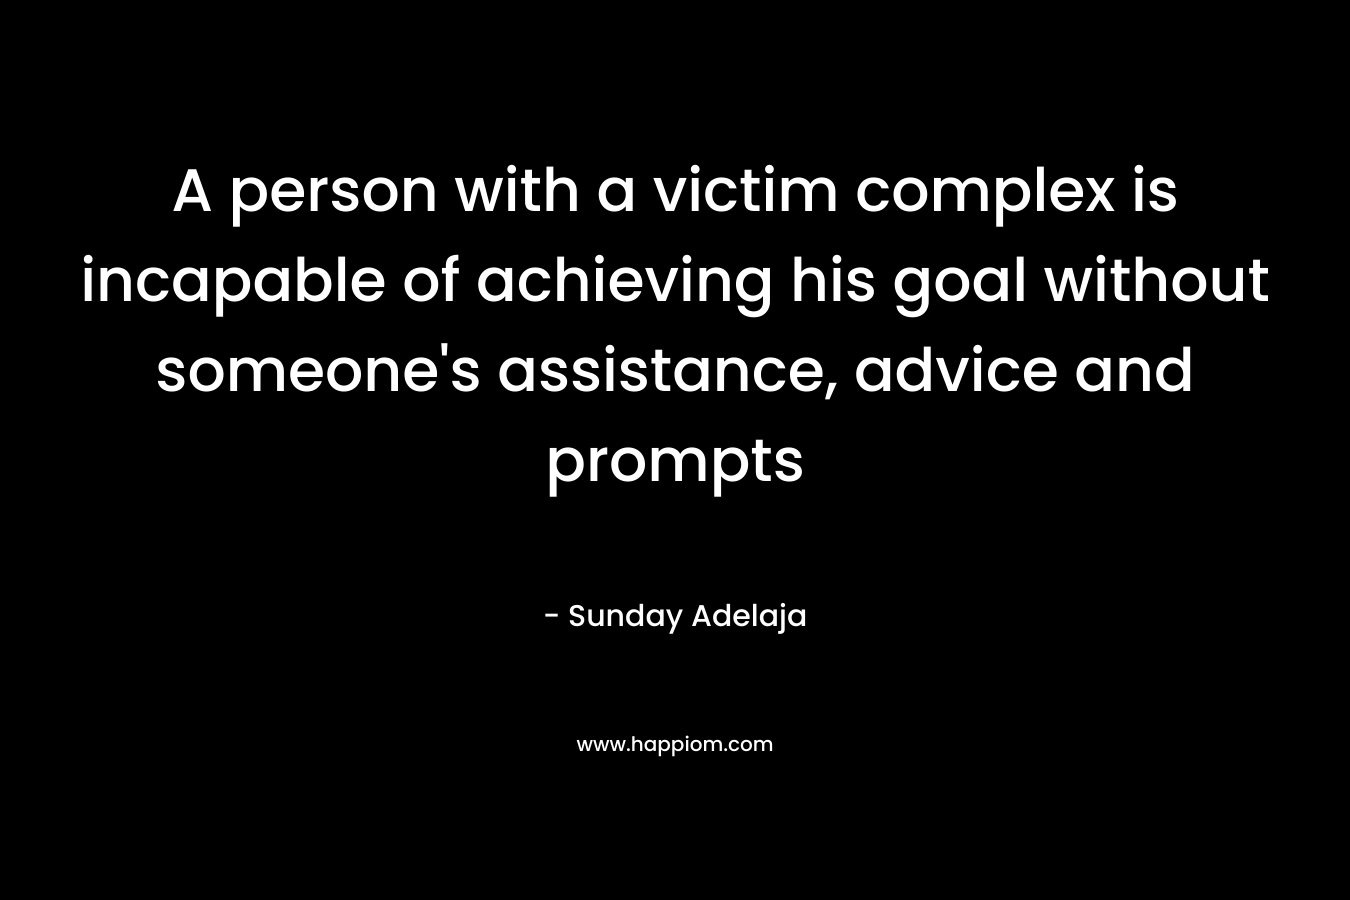 A person with a victim complex is incapable of achieving his goal without someone’s assistance, advice and prompts – Sunday Adelaja